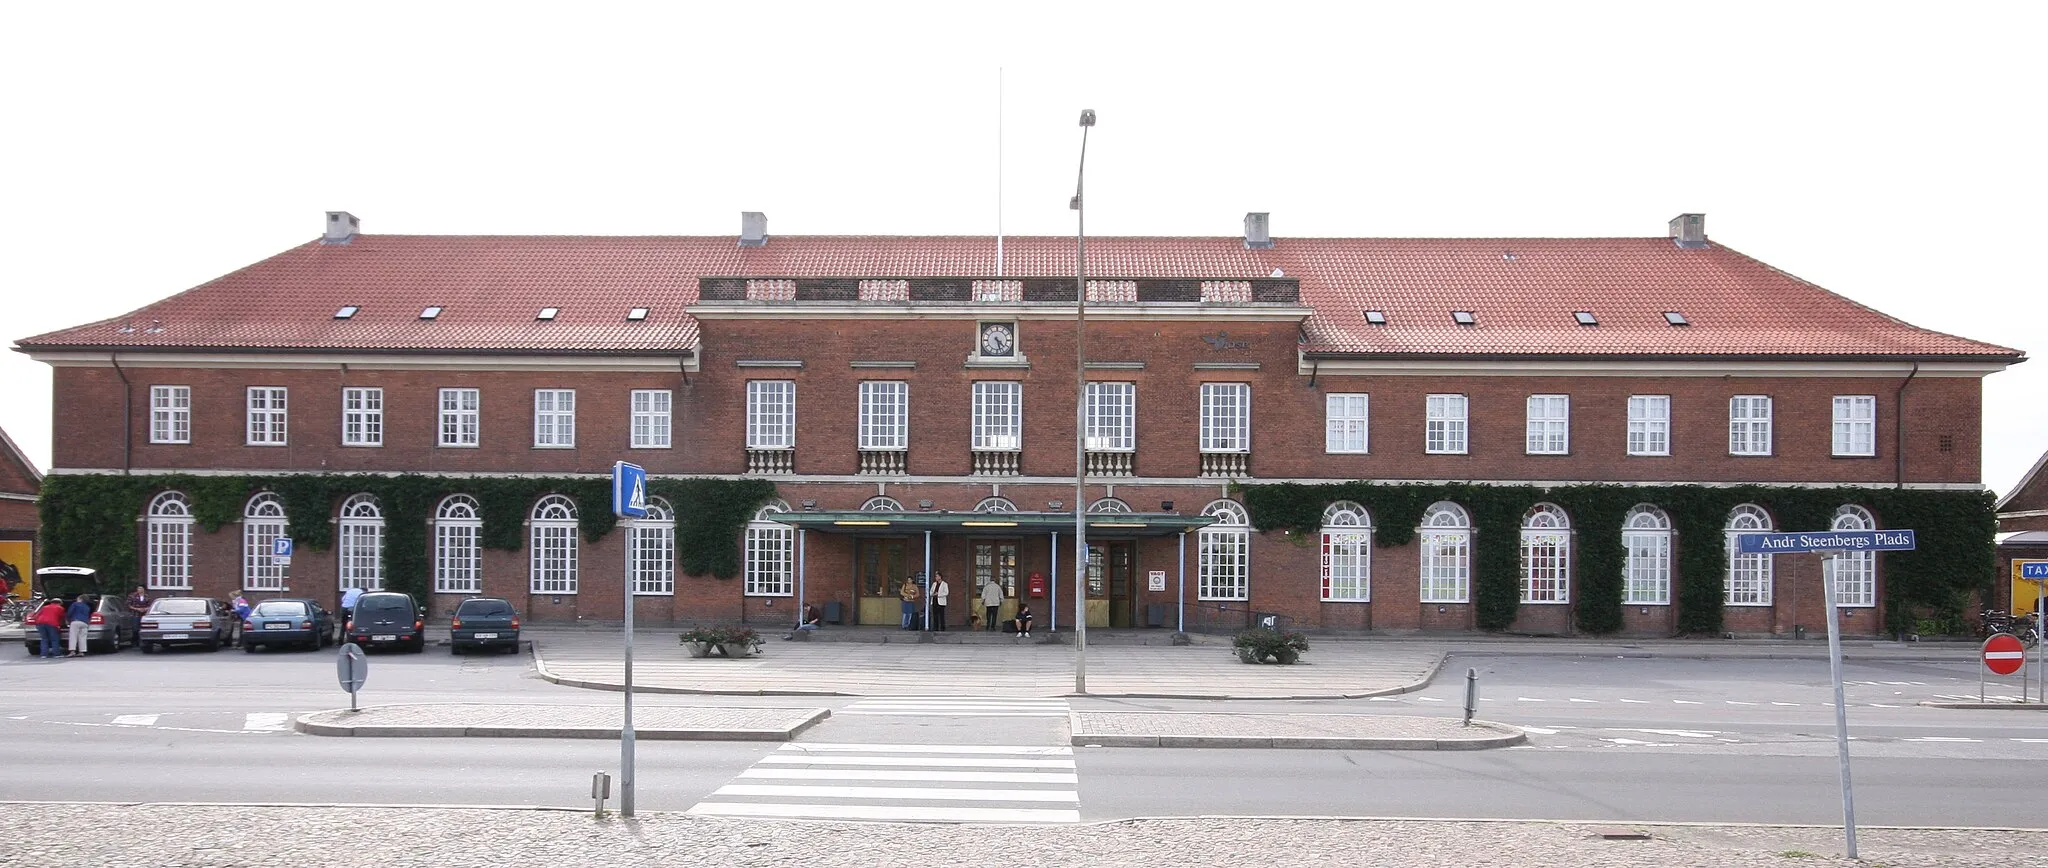 Photo showing: The train station in Horsens, Denmark.